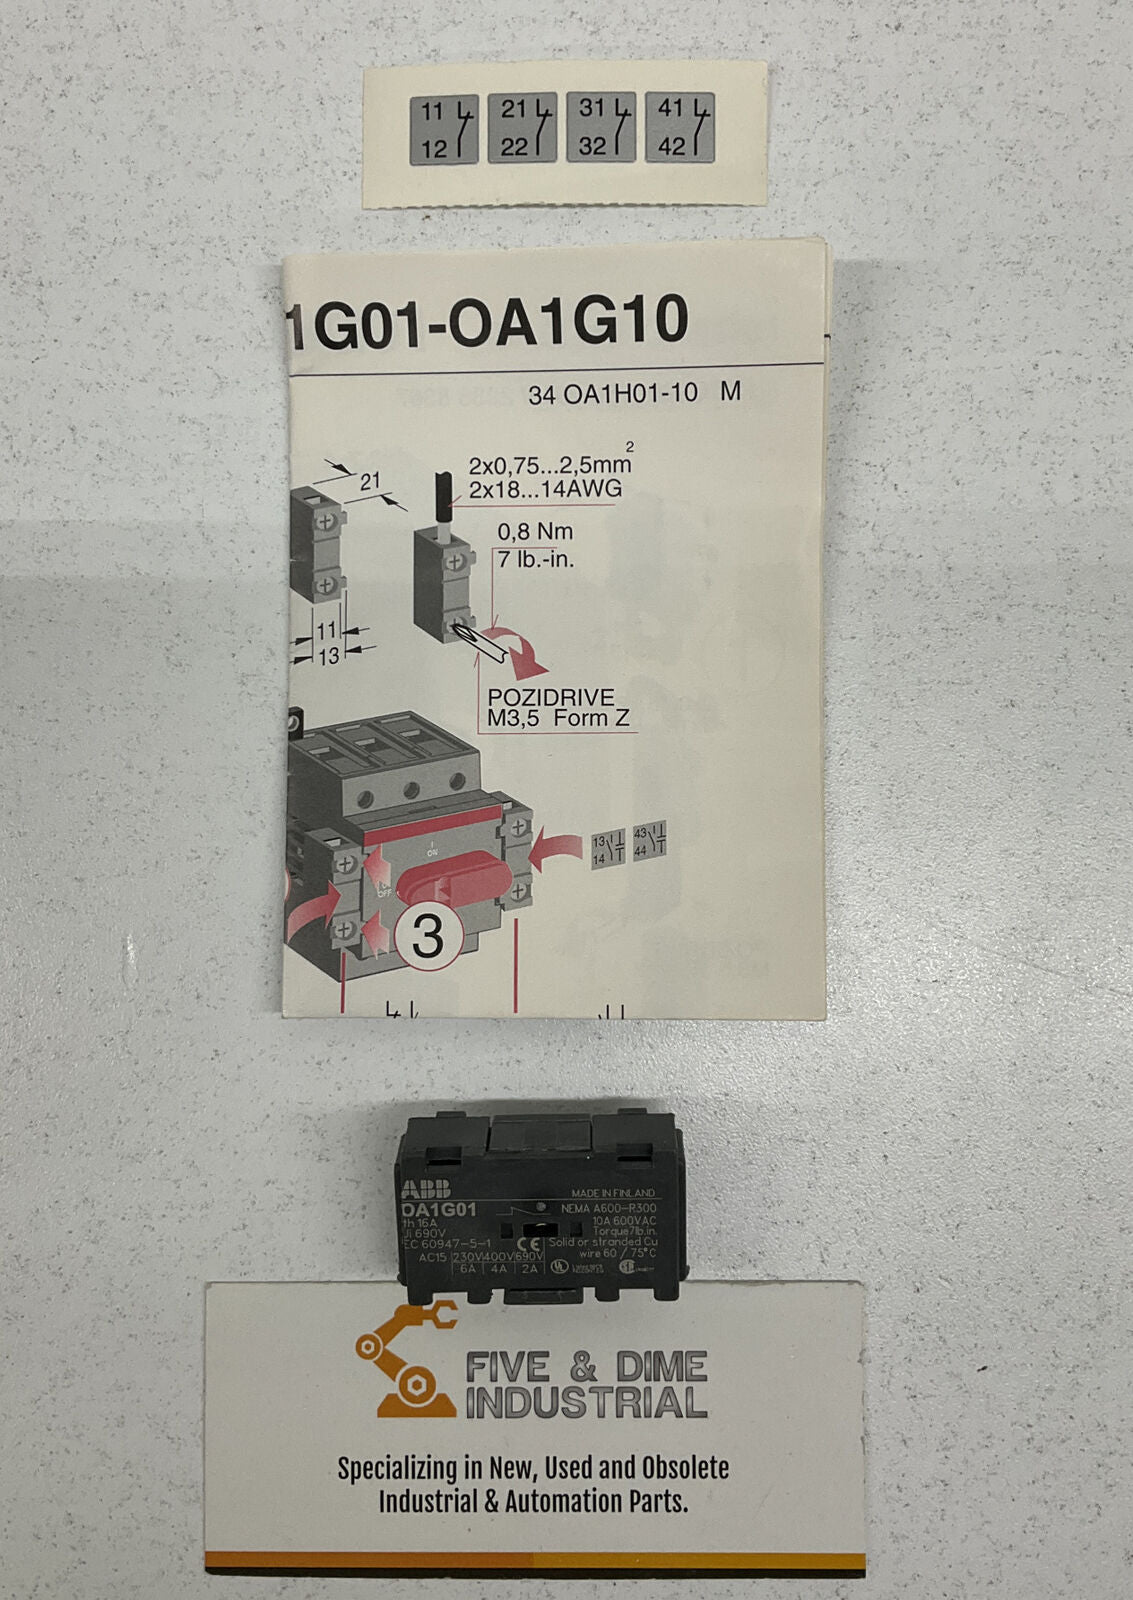 ABB 0A1G01 New Auxiliary Contact NC 10A 600V (RE110) - 0